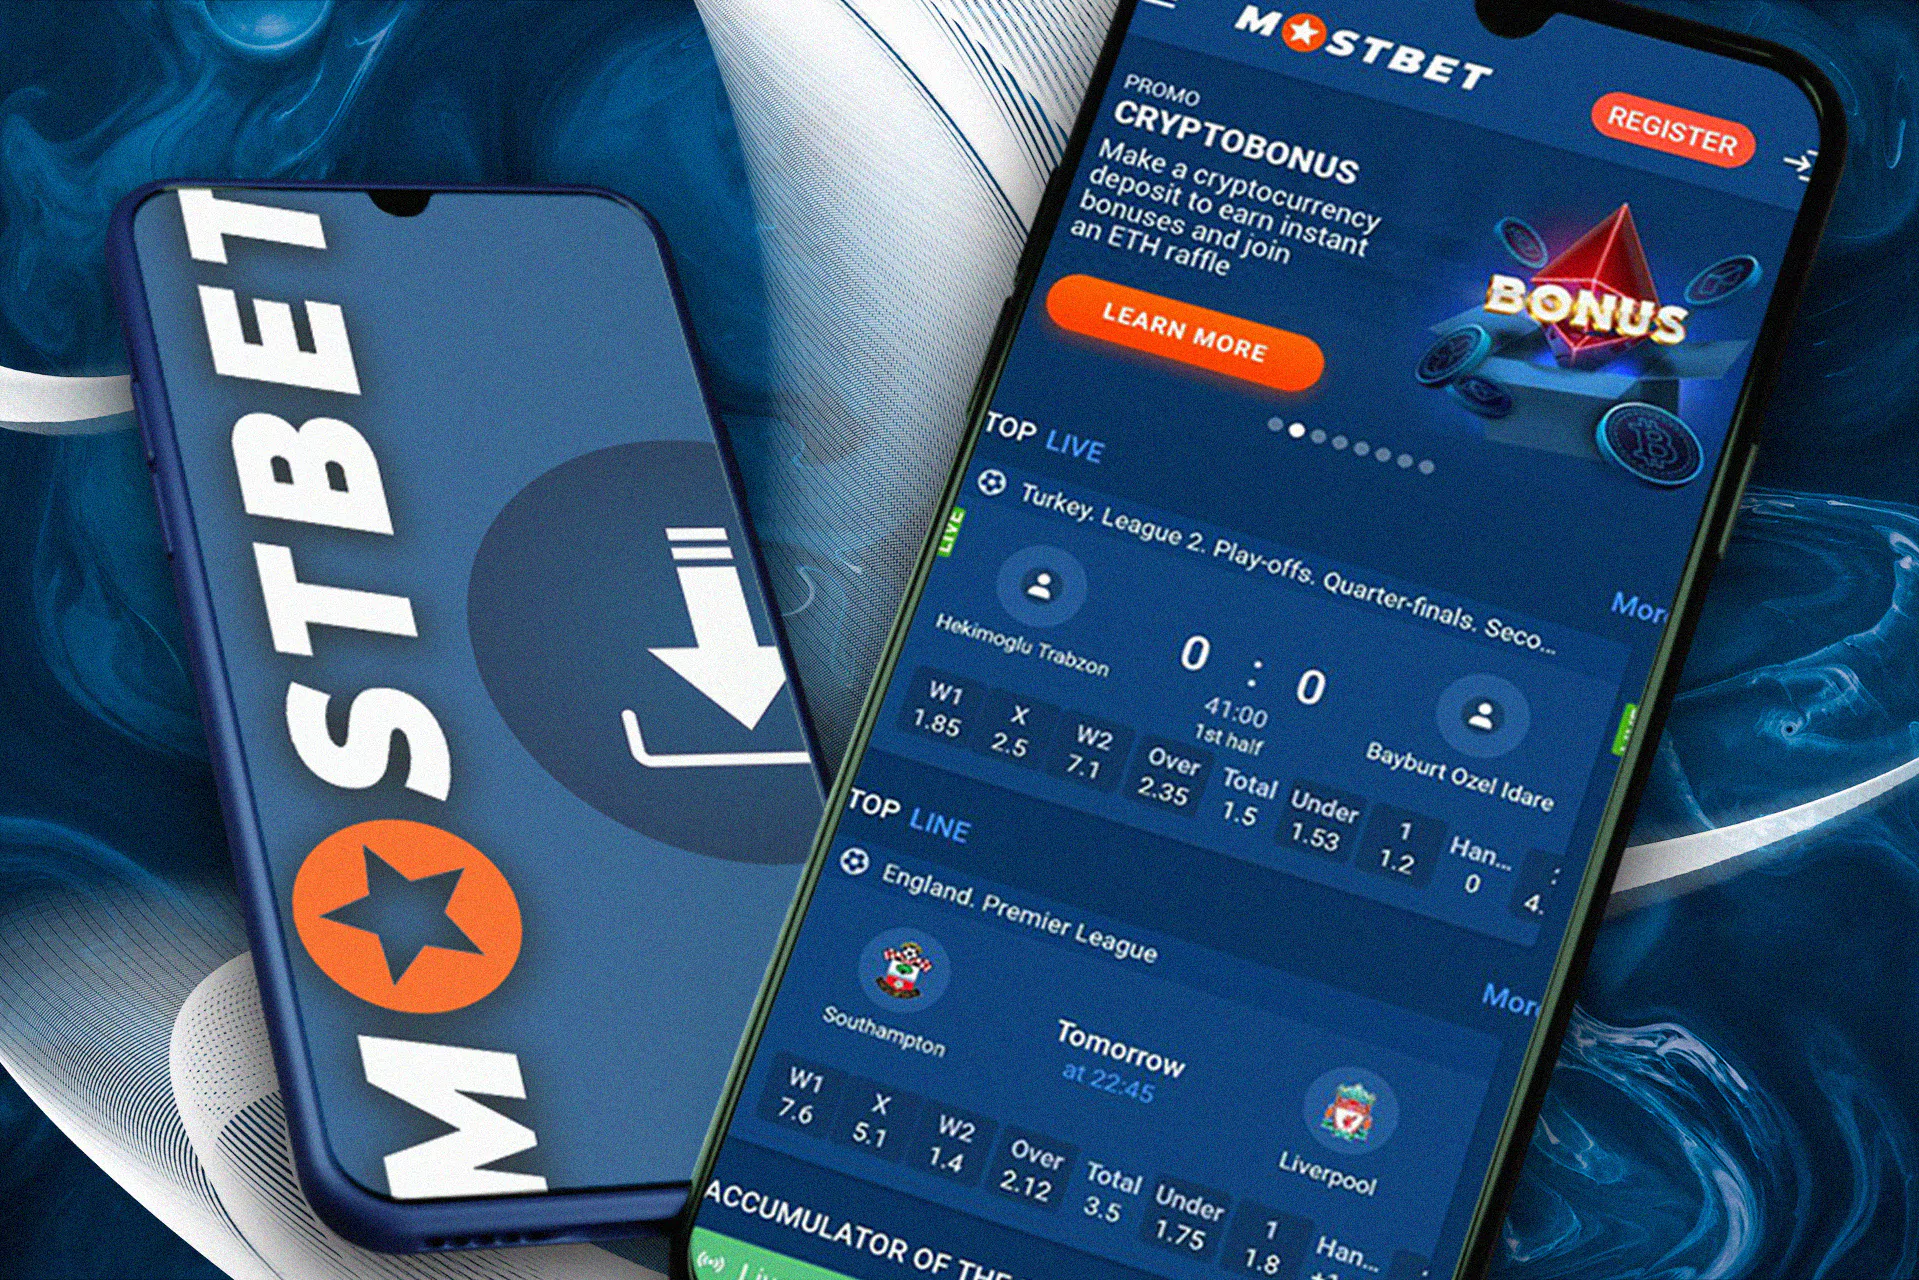 Downloading Mostbet application for casino on mobile devices.